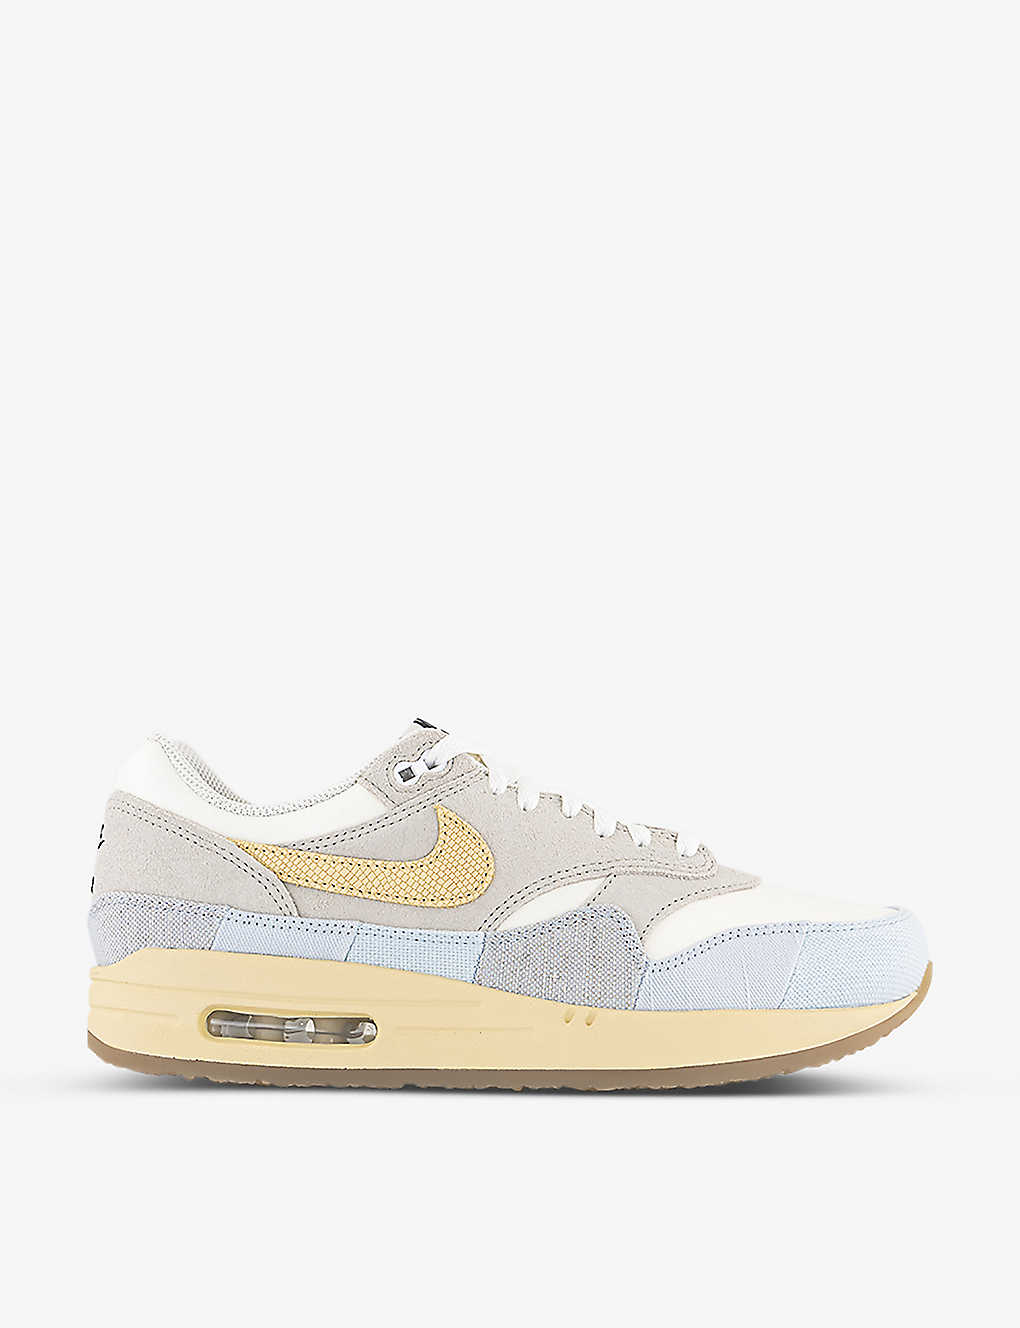 NIKE NIKE MEN'S LIGHT BONE PALE VANILLA AIR MAX 1 87 LEATHER AND TEXTILE LOW-TOP TRAINERS,68527960